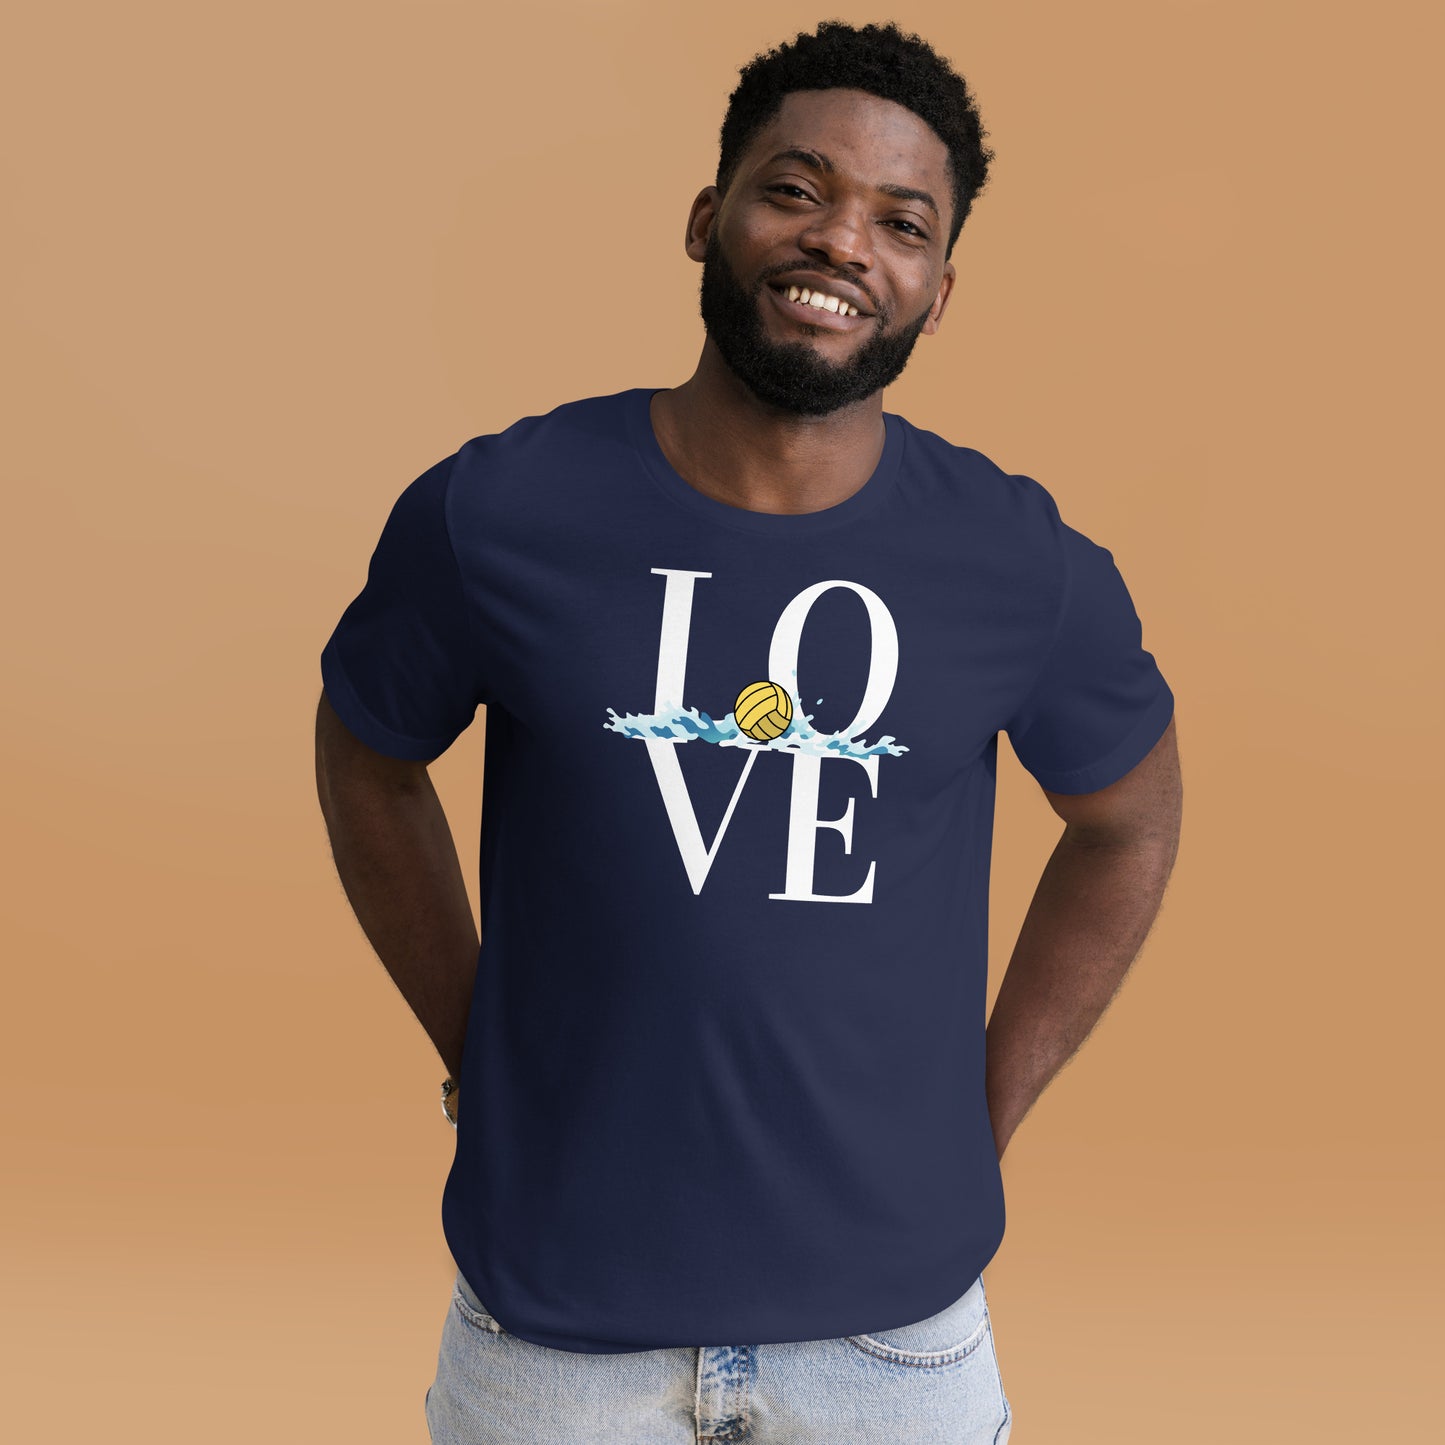 LOVE Waterpolo with a Small Splash - Unisex Soft T-shirt - Bella Canvas 3001